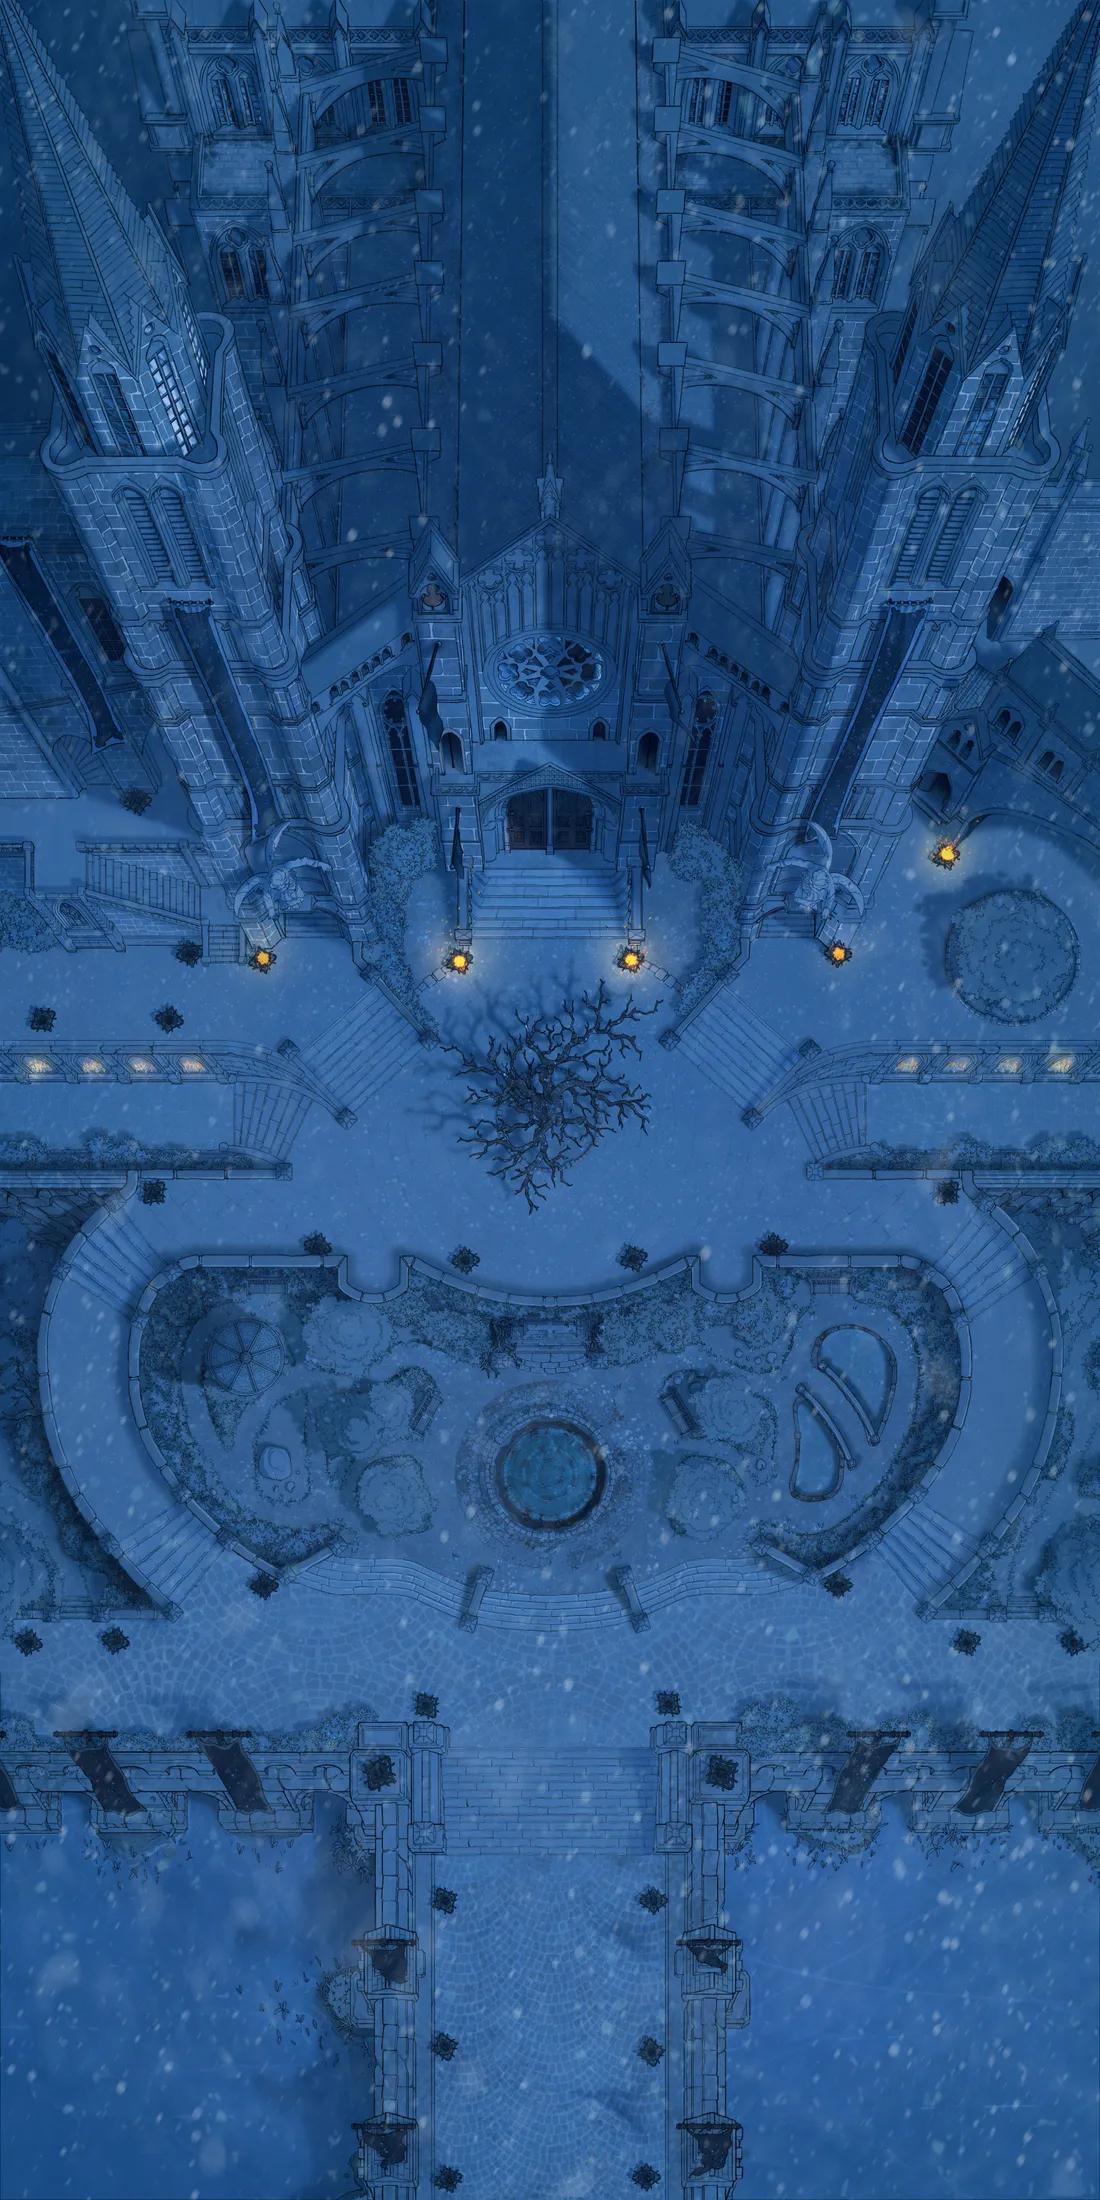 Grand Cathedral map, Winter Night variant